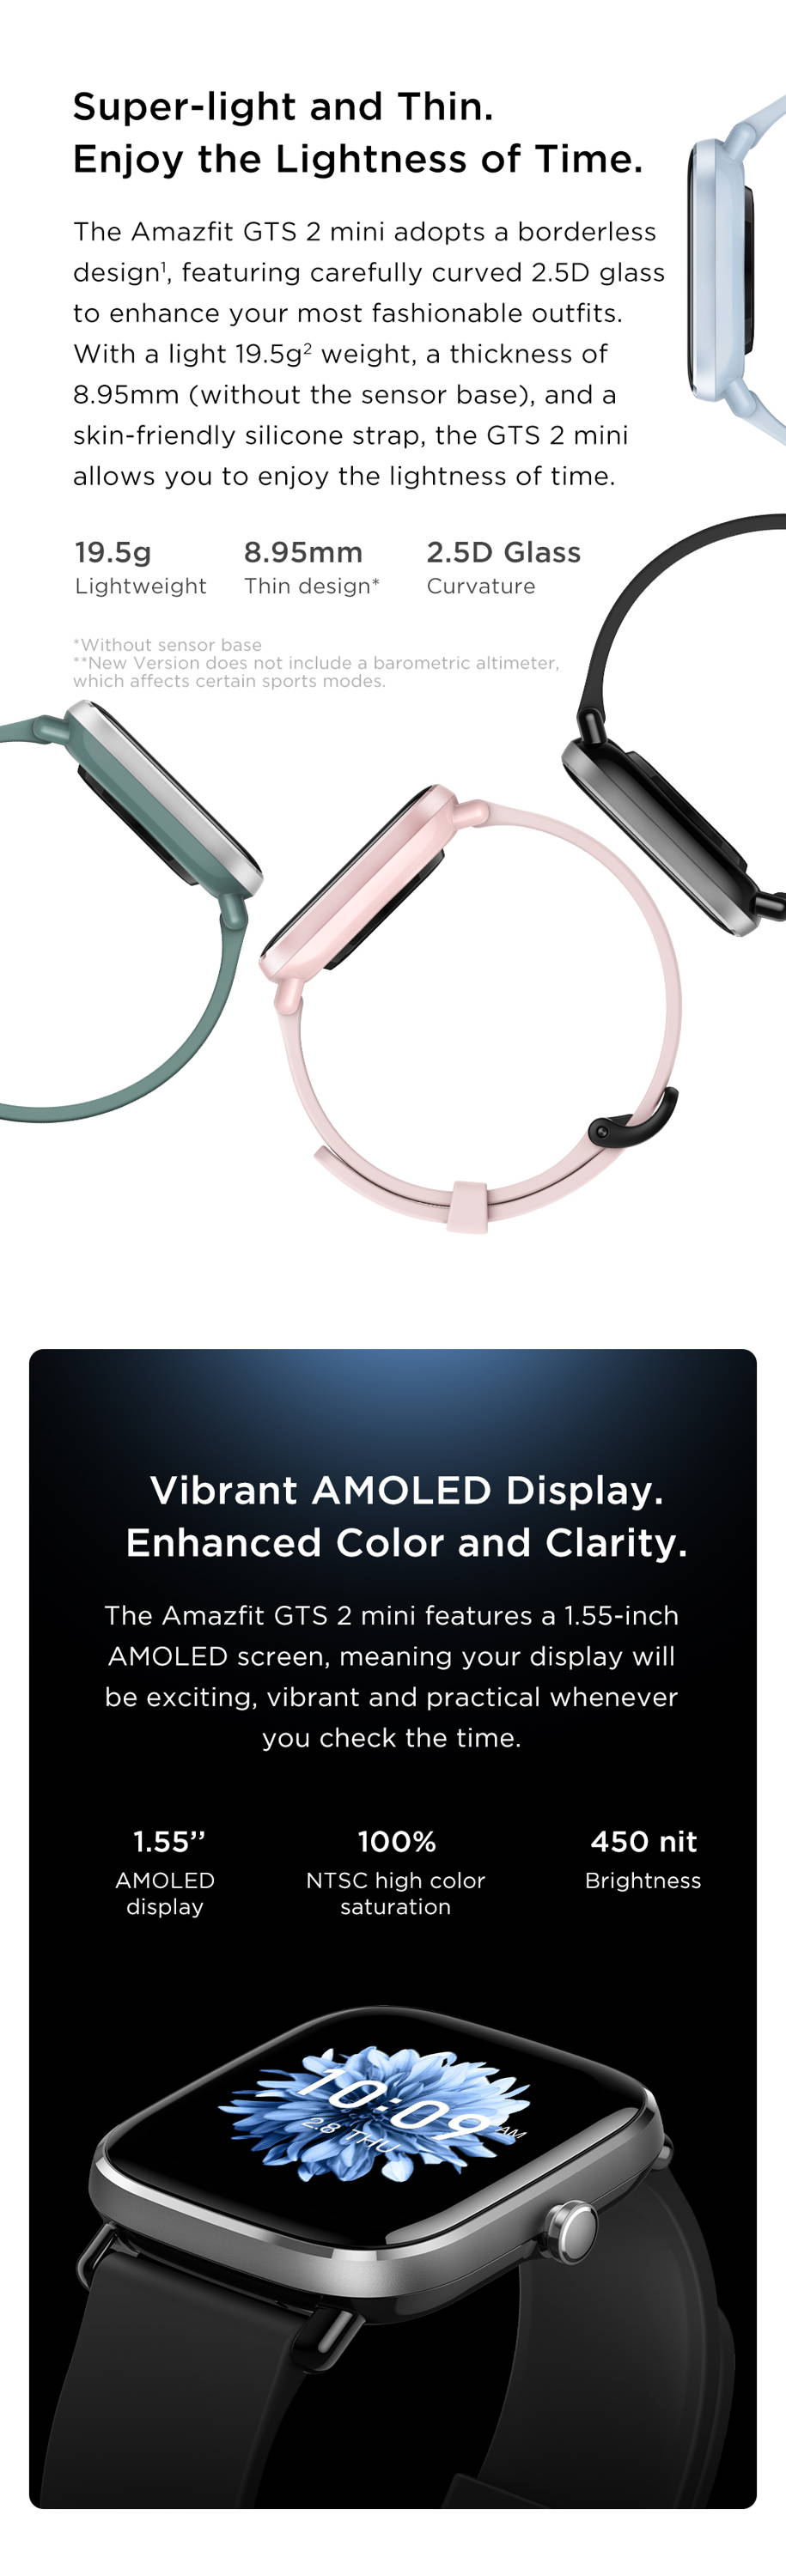 Amazfit GTS 2 Mini launches globally: Here's where to buy it